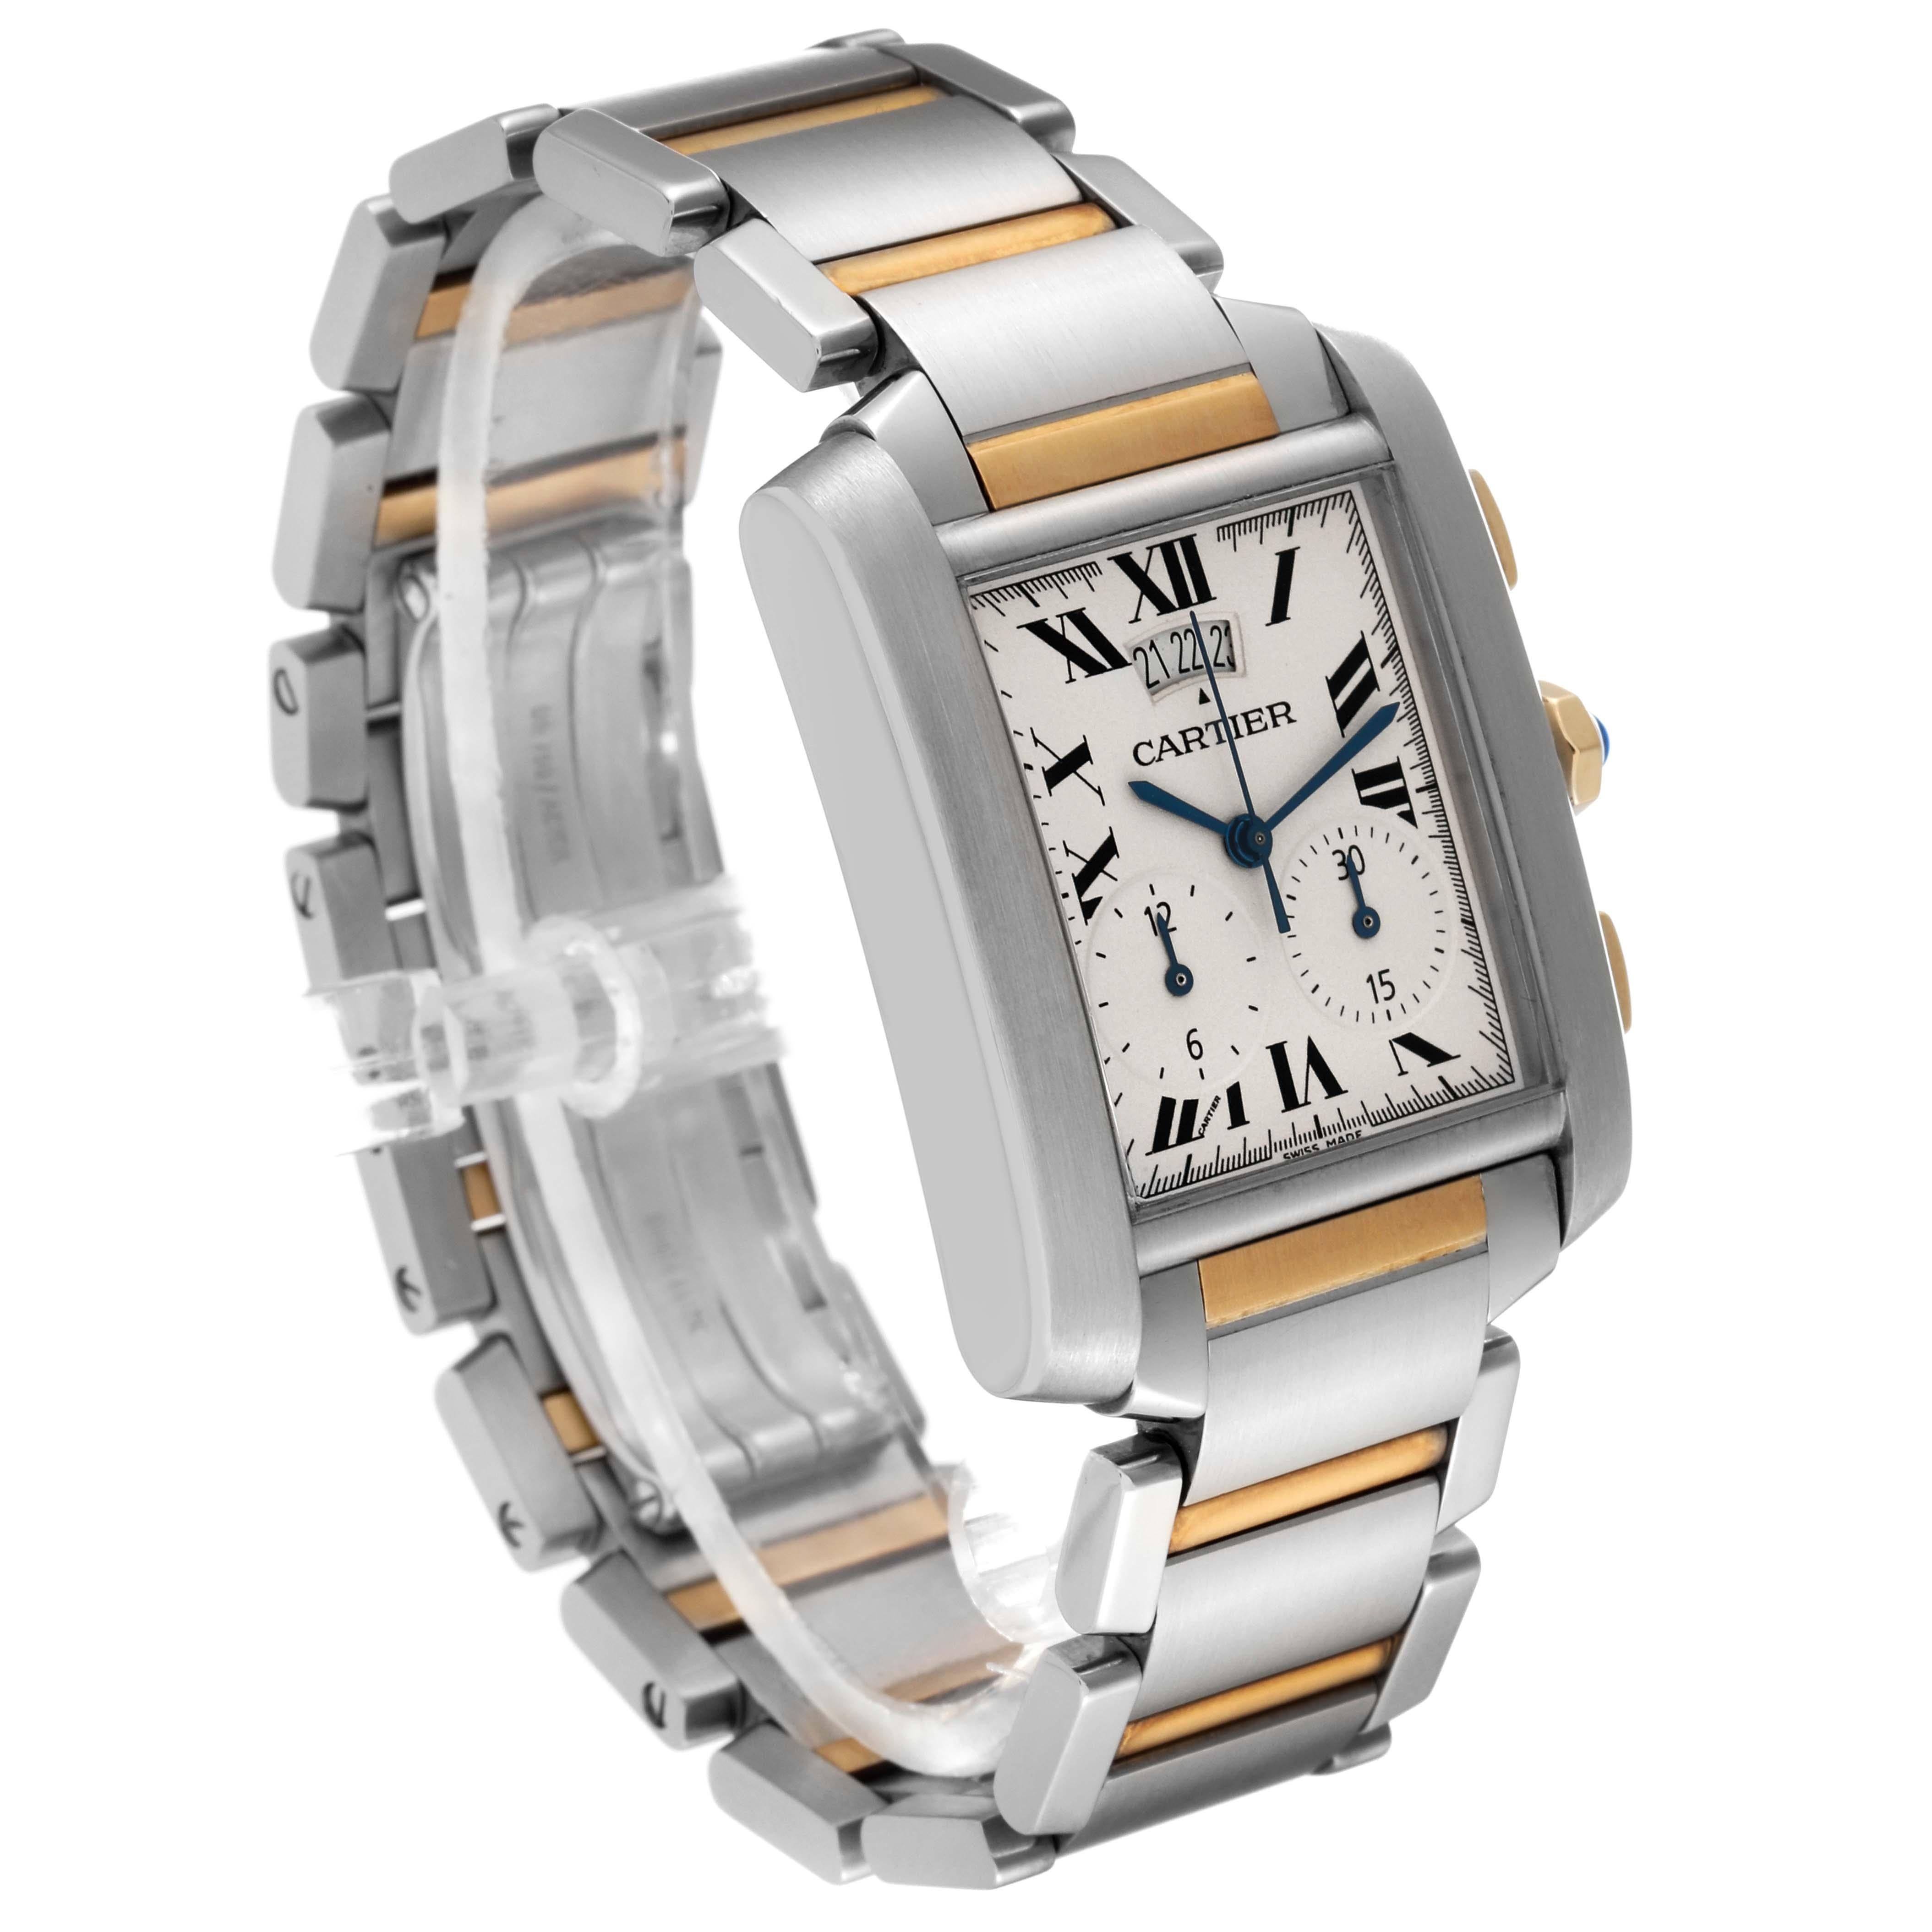 Cartier Tank Francaise Steel Yellow Gold Chronograph Mens Watch W51025Q4 For Sale 1